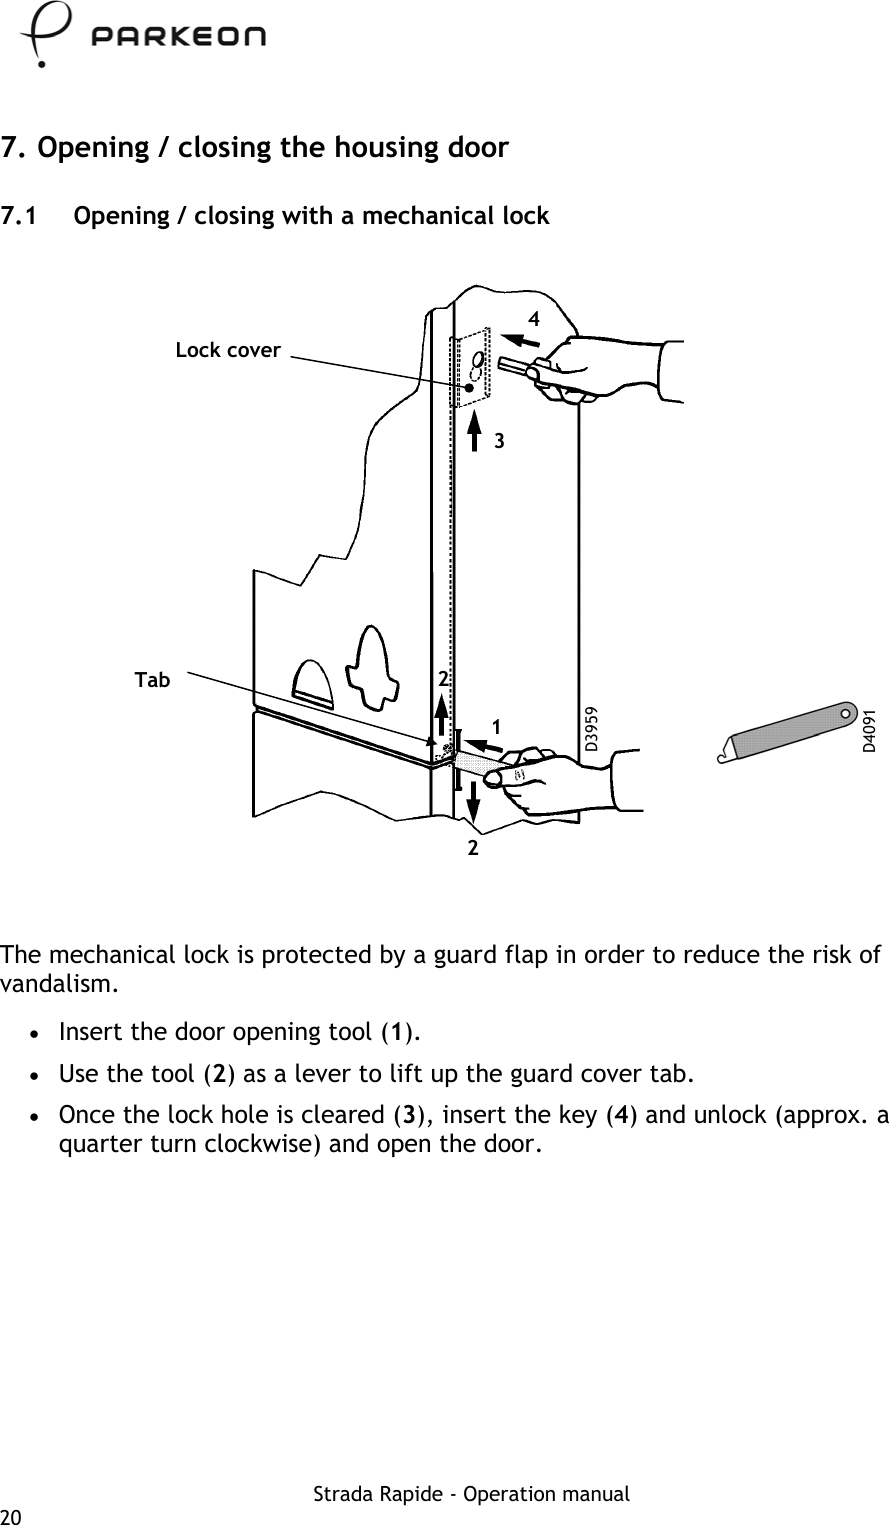     7. Opening / closing the housing door 7.1  Opening / closing with a mechanical lock  4 Lock cover 3 2 Tab D3959 D4091 1  2   The mechanical lock is protected by a guard flap in order to reduce the risk of vandalism. •  Insert the door opening tool (1). •  Use the tool (2) as a lever to lift up the guard cover tab. •  Once the lock hole is cleared (3), insert the key (4) and unlock (approx. a quarter turn clockwise) and open the door. Strada Rapide - Operation manual 20 